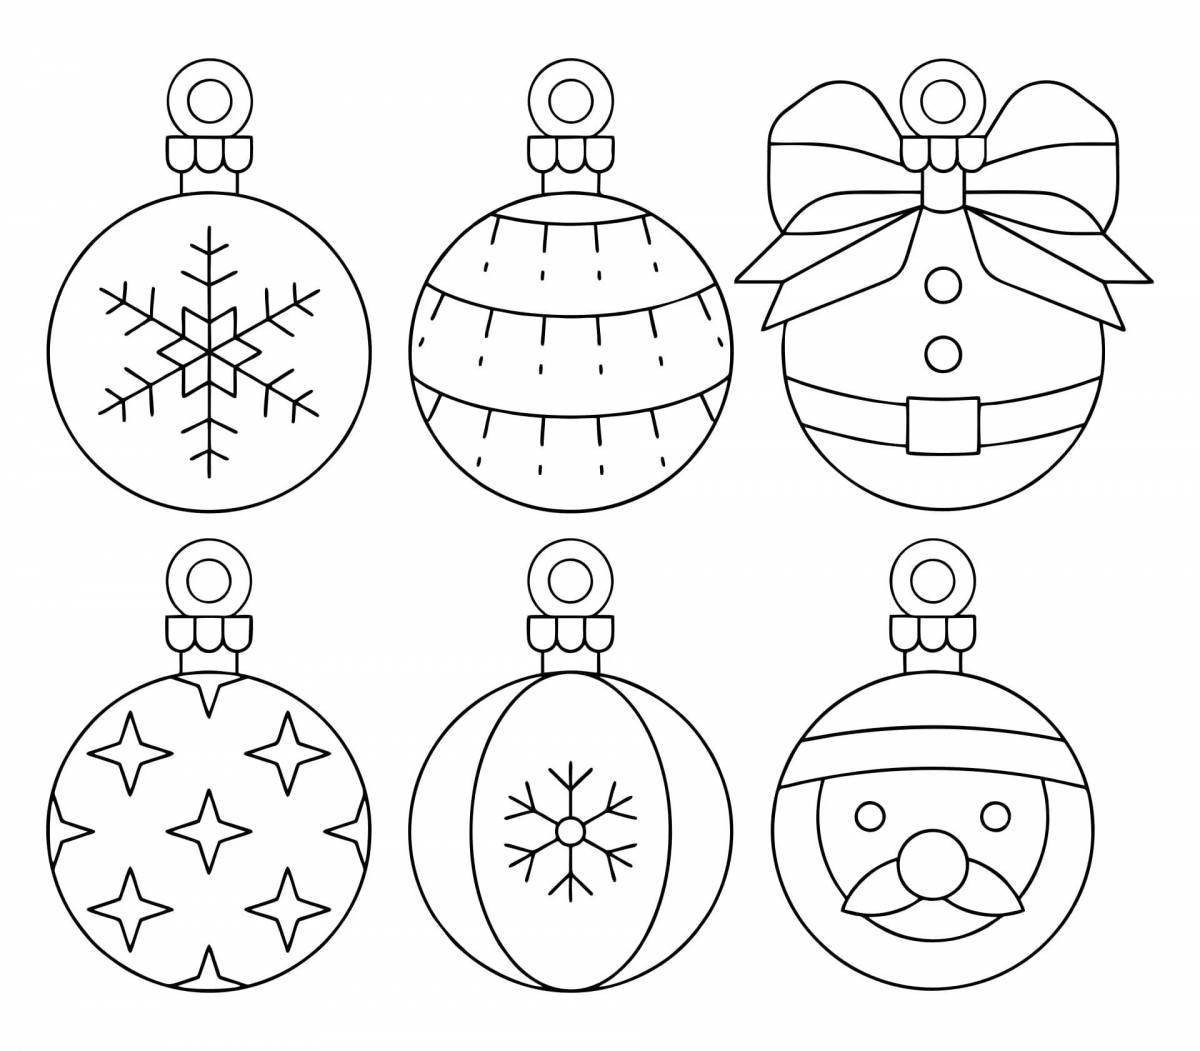 Bright Christmas ball coloring for kids